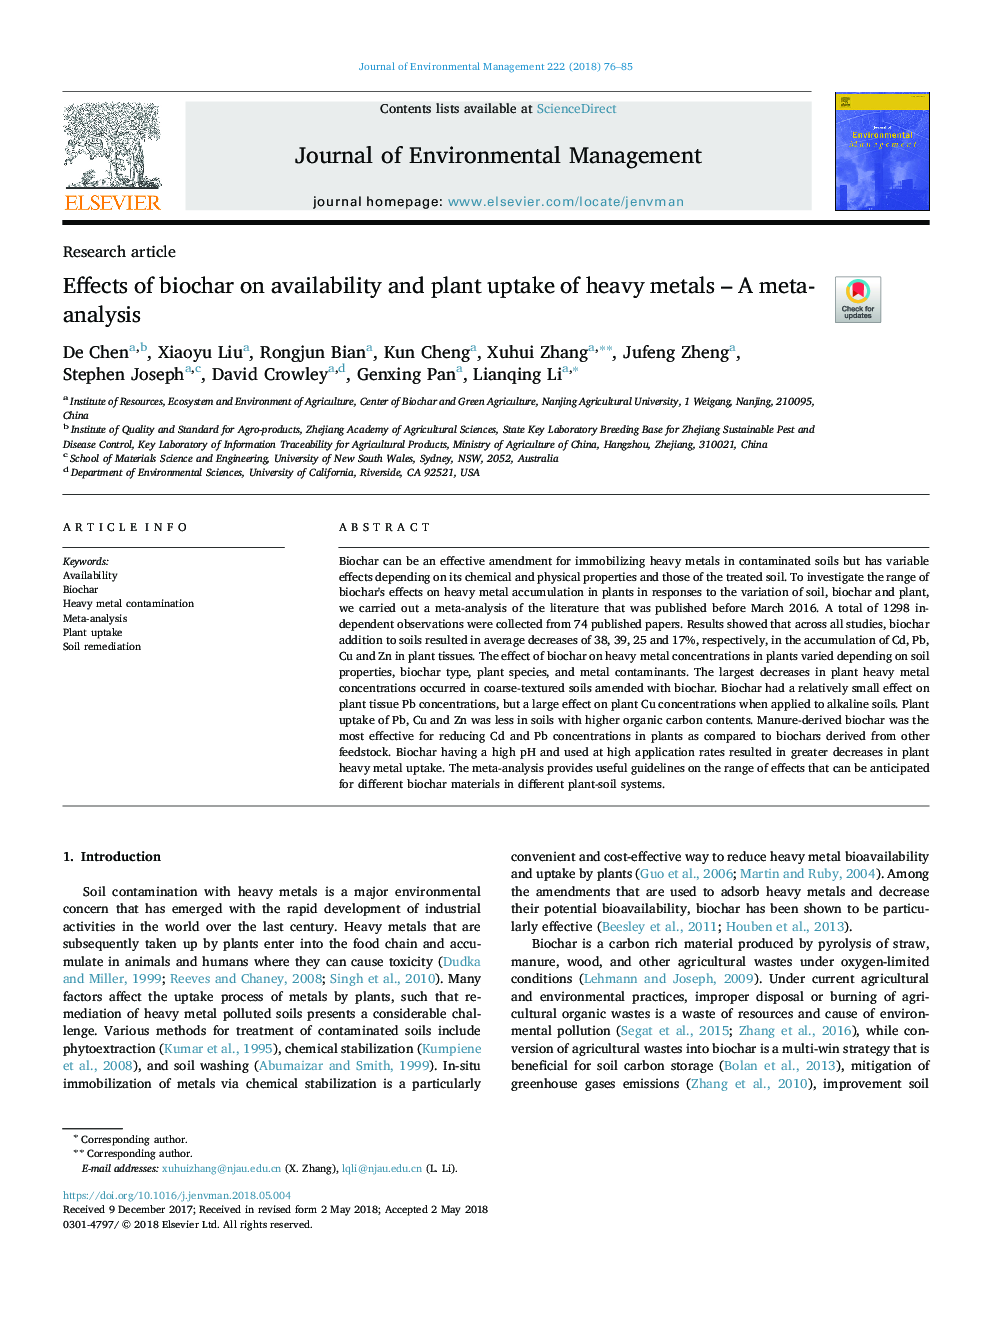 Effects of biochar on availability and plant uptake of heavy metals - A meta-analysis